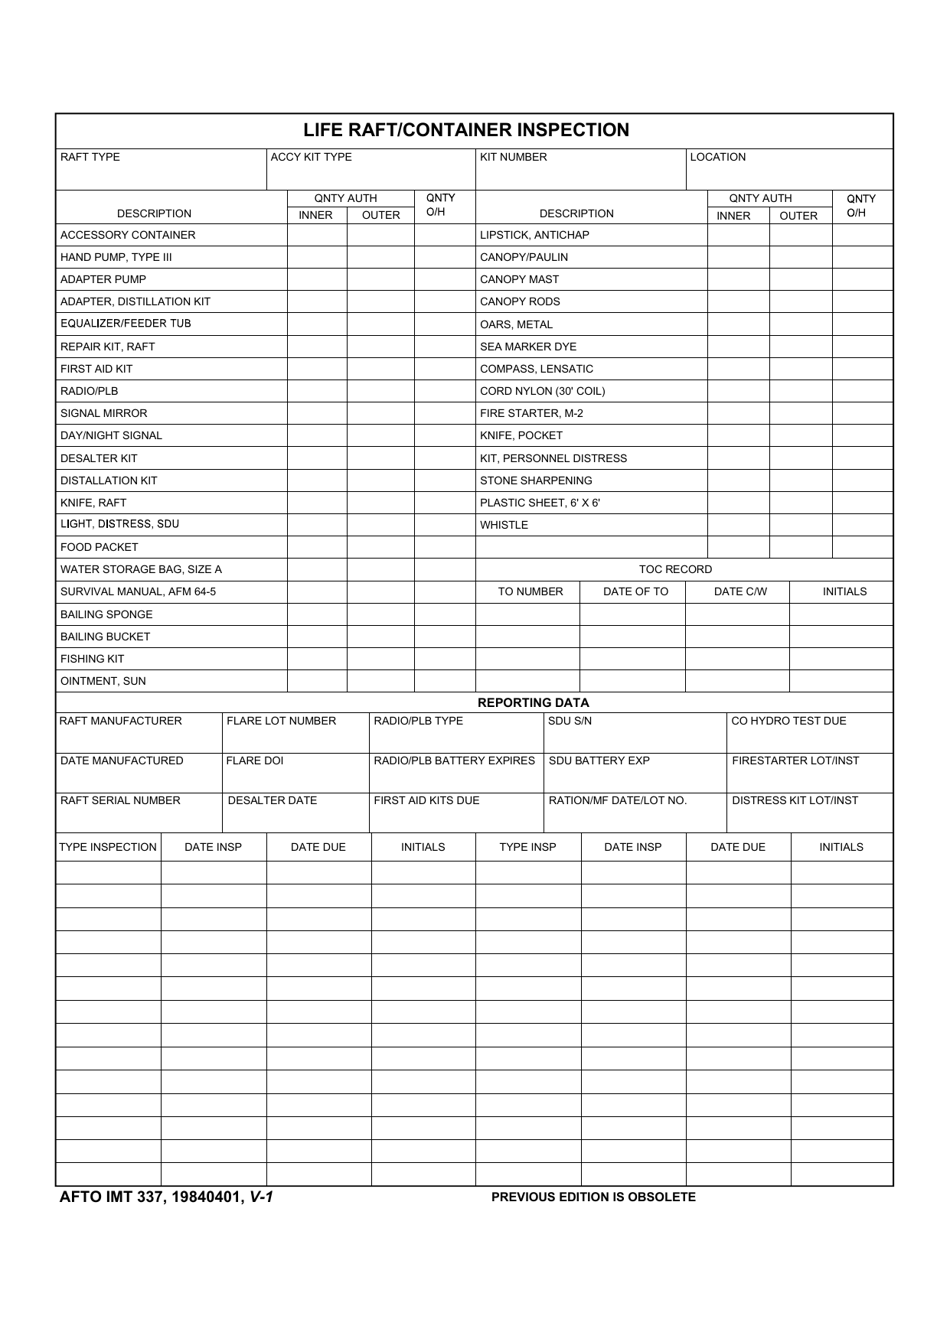 AFTO IMT Form 337 Life Raft / Container Inspection, Page 1